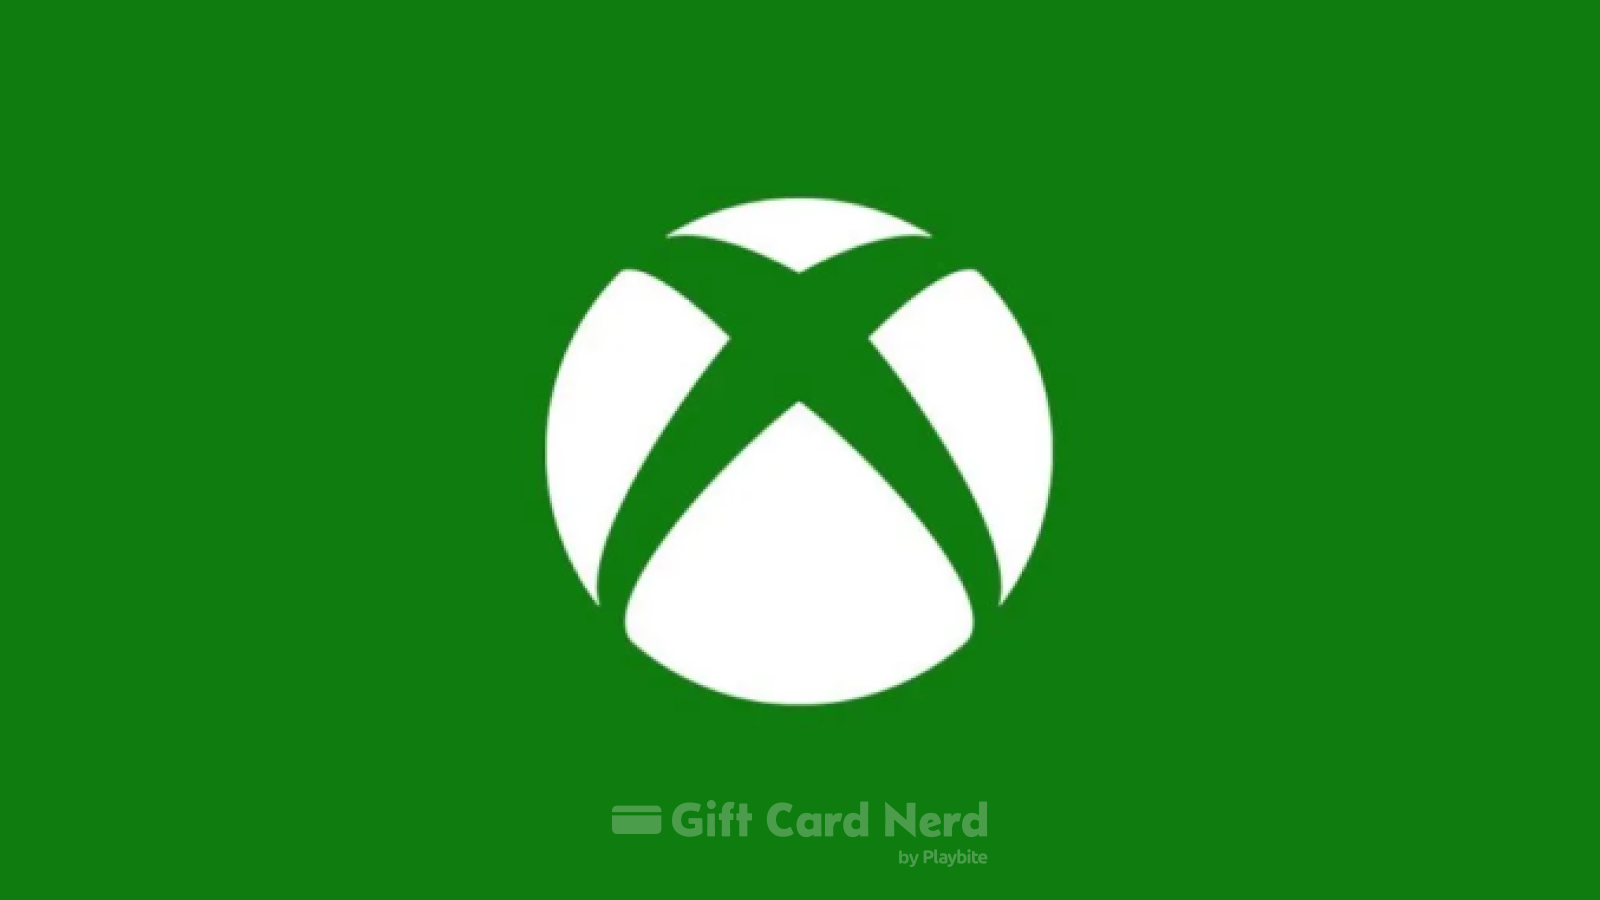 Where to Buy Xbox Gift Cards: Does Walmart Sell Them?